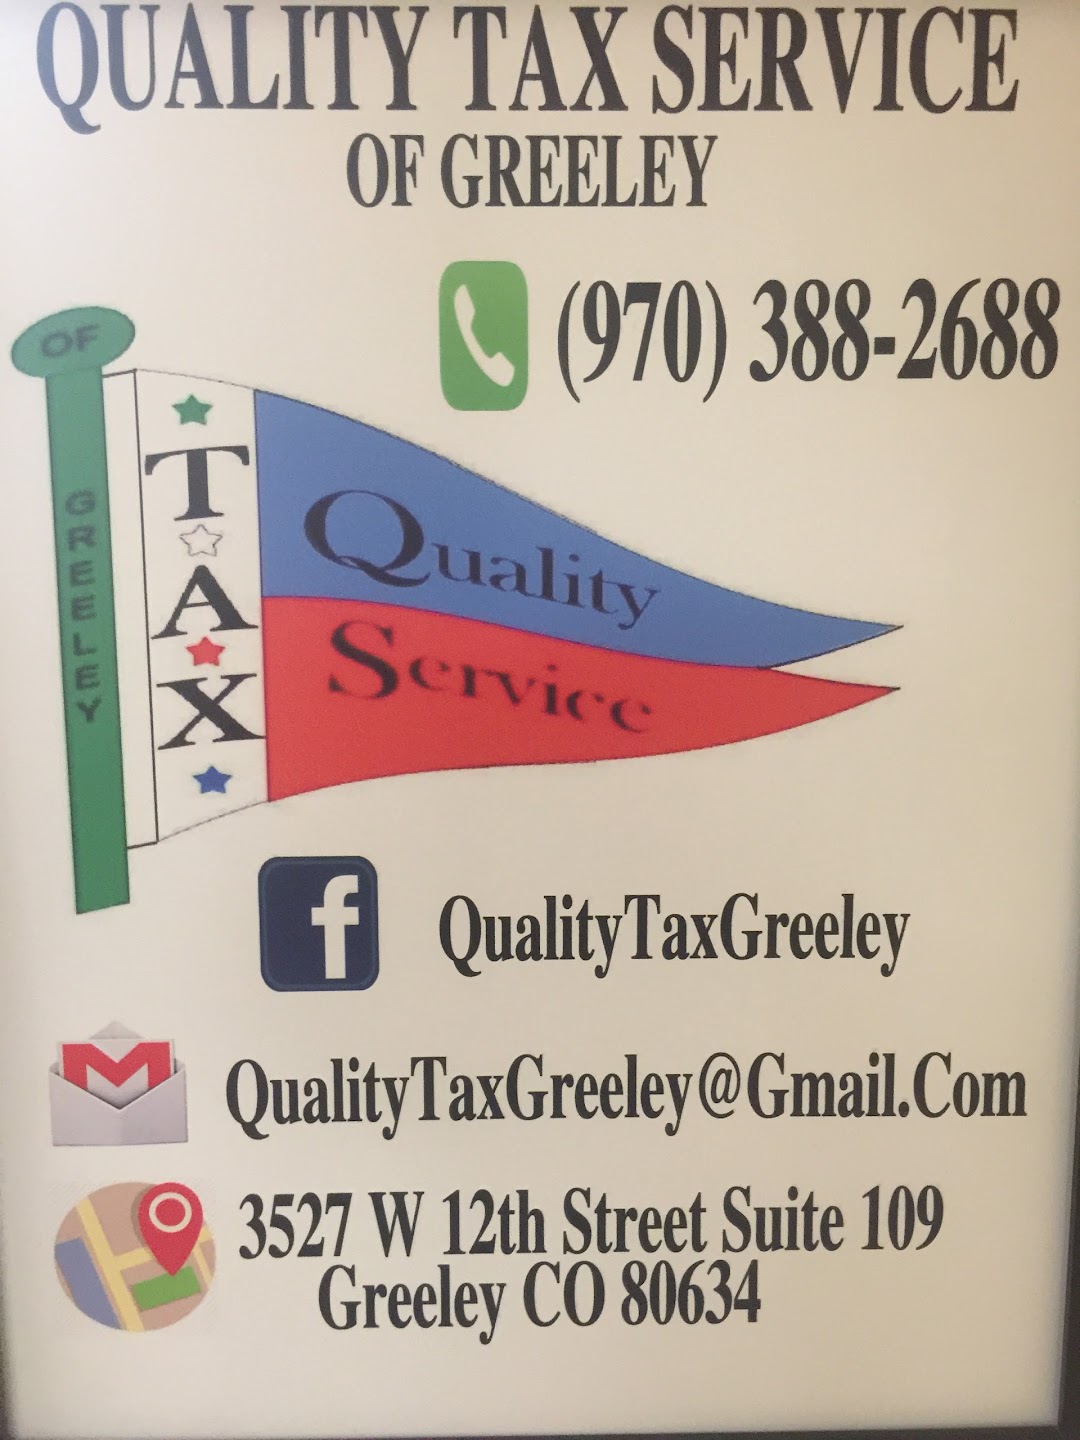 Quality Tax Service of Greeley